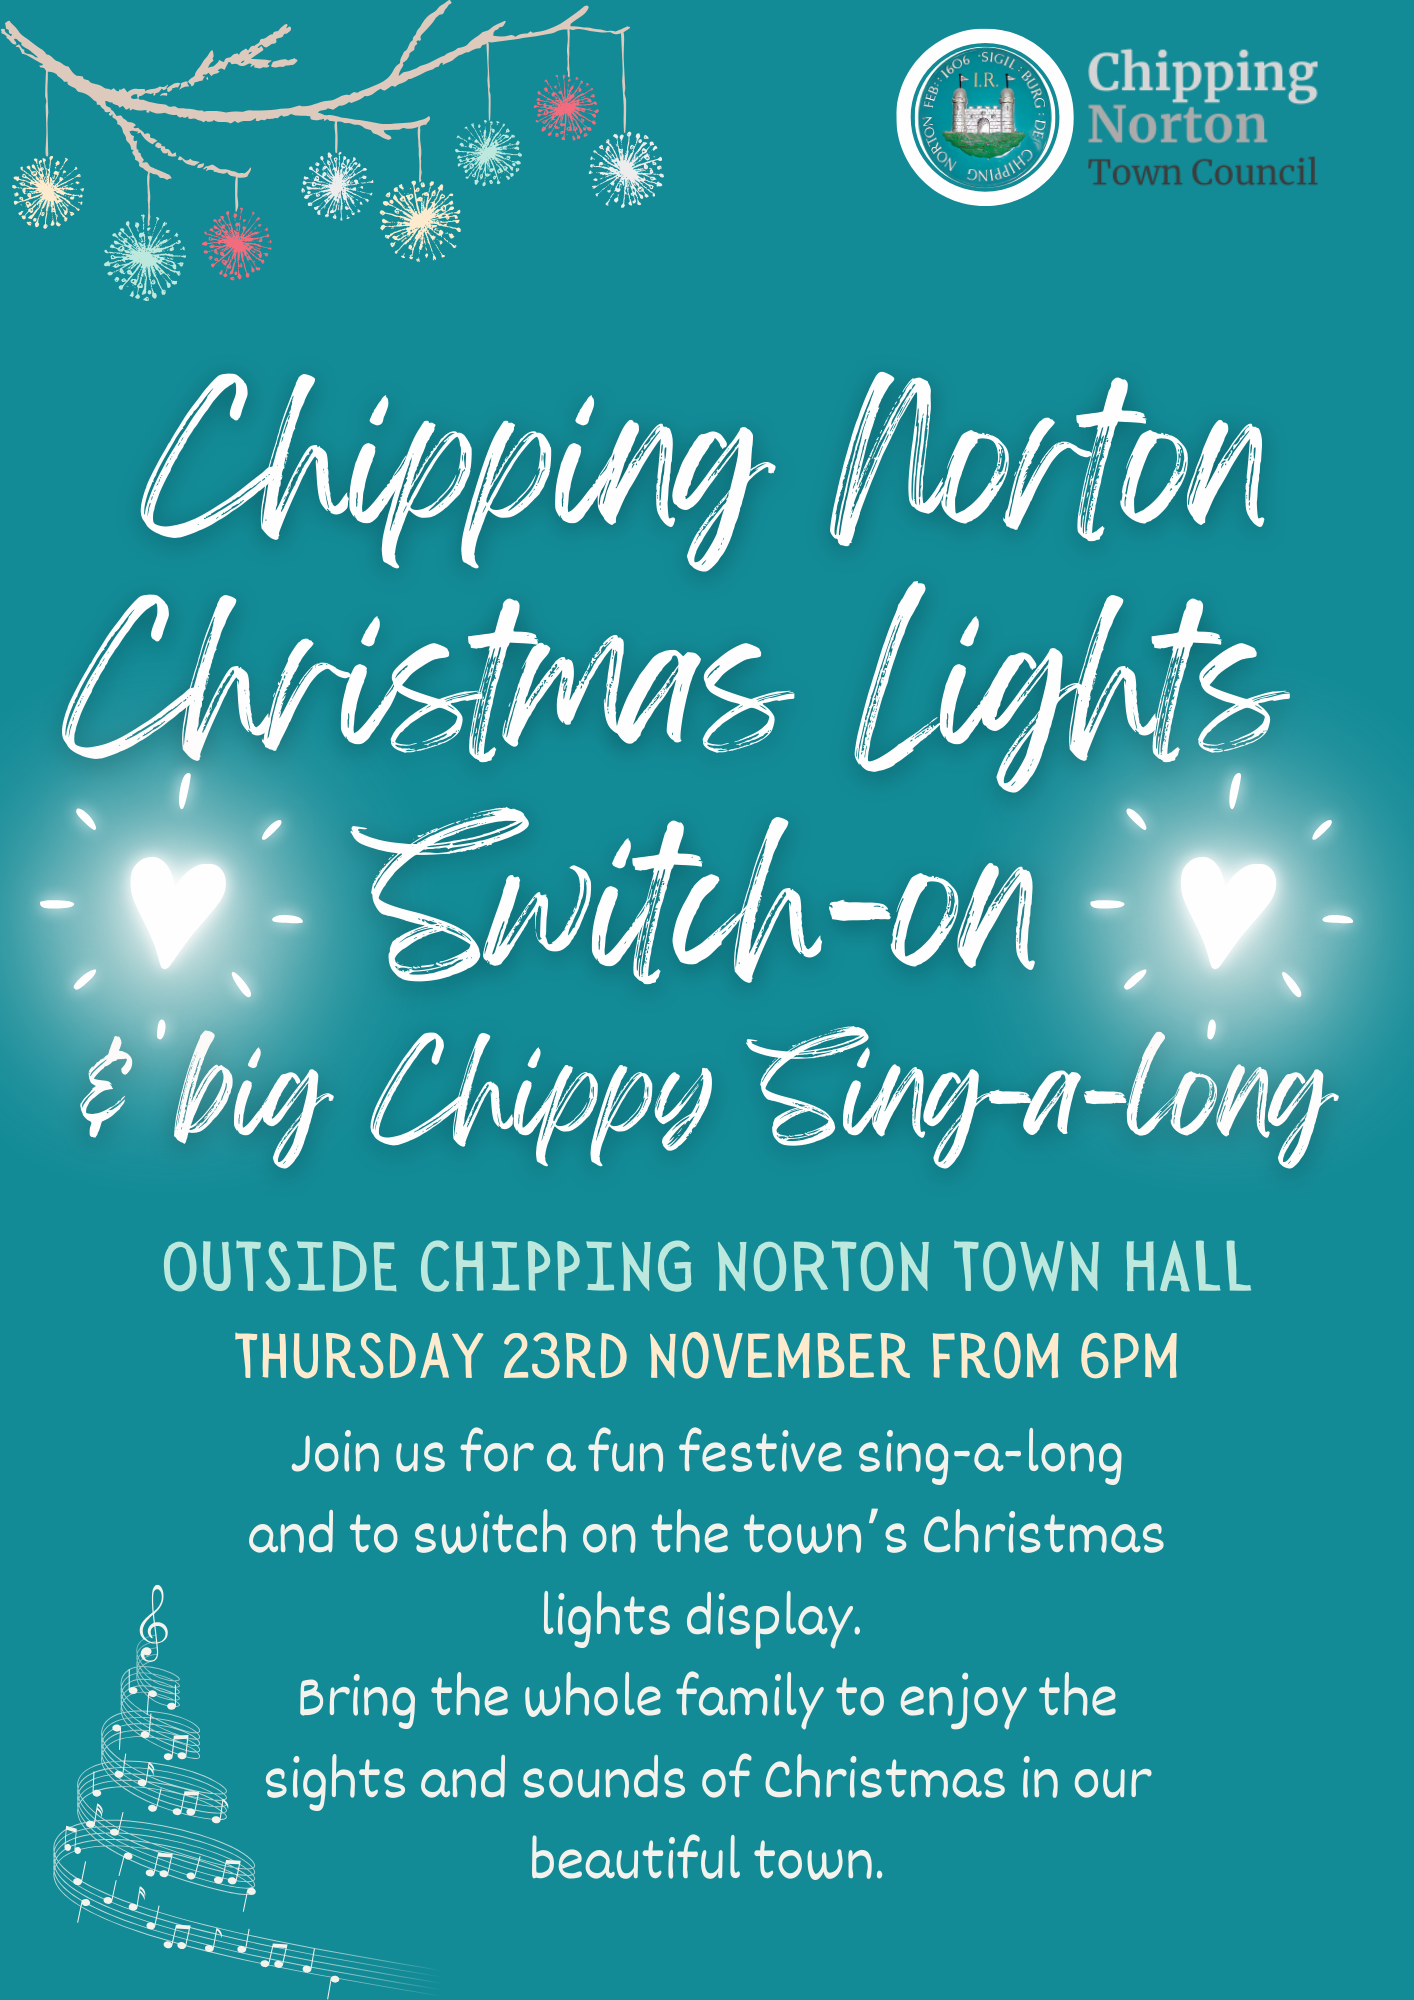 Outside Chipping Norton Town Hall
Thursday 23rd November from 6pm 
Join us for a fun festive sing-a-long and to switch on the town’s Christmas lights display. 
Bring the whole family to enjoy the sights and sounds of Christmas in our beautiful town.